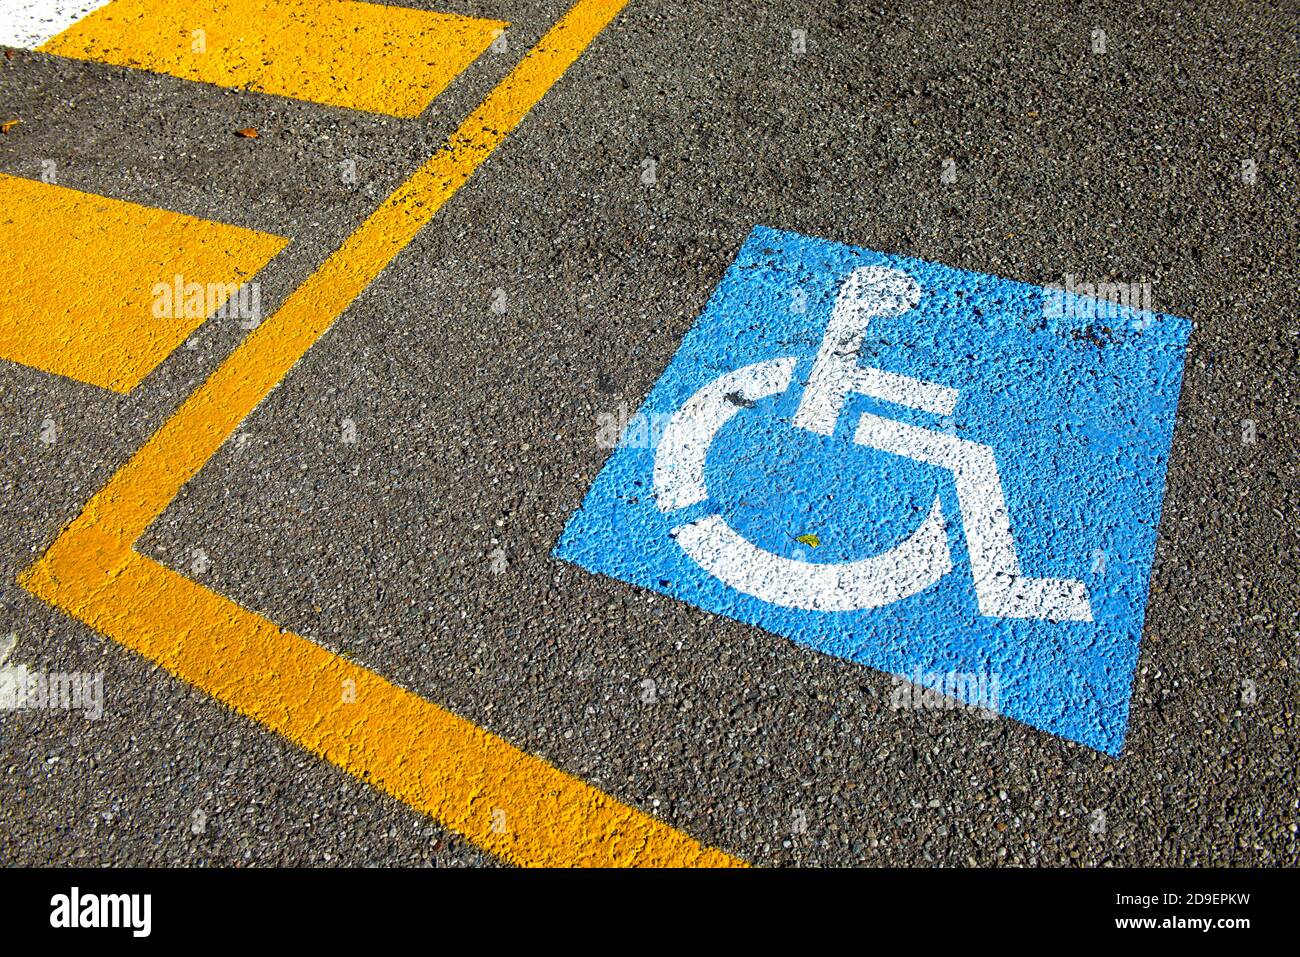 Disability sign on the asphalt for reserved parking spot. Stock Photo